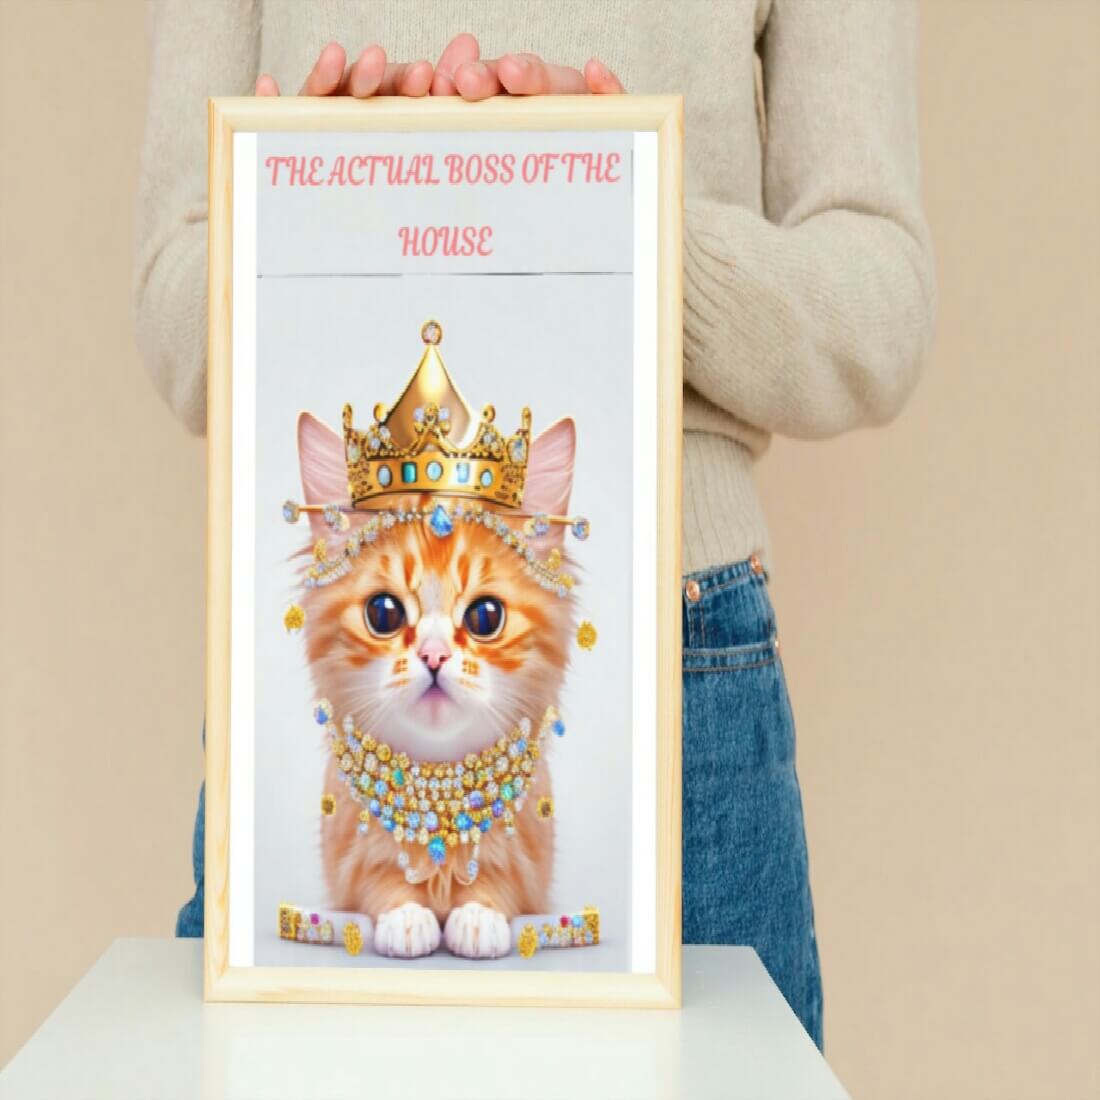 Cute Cat Printable Wall Art with Text "The Actual Boss of the House" preview image.